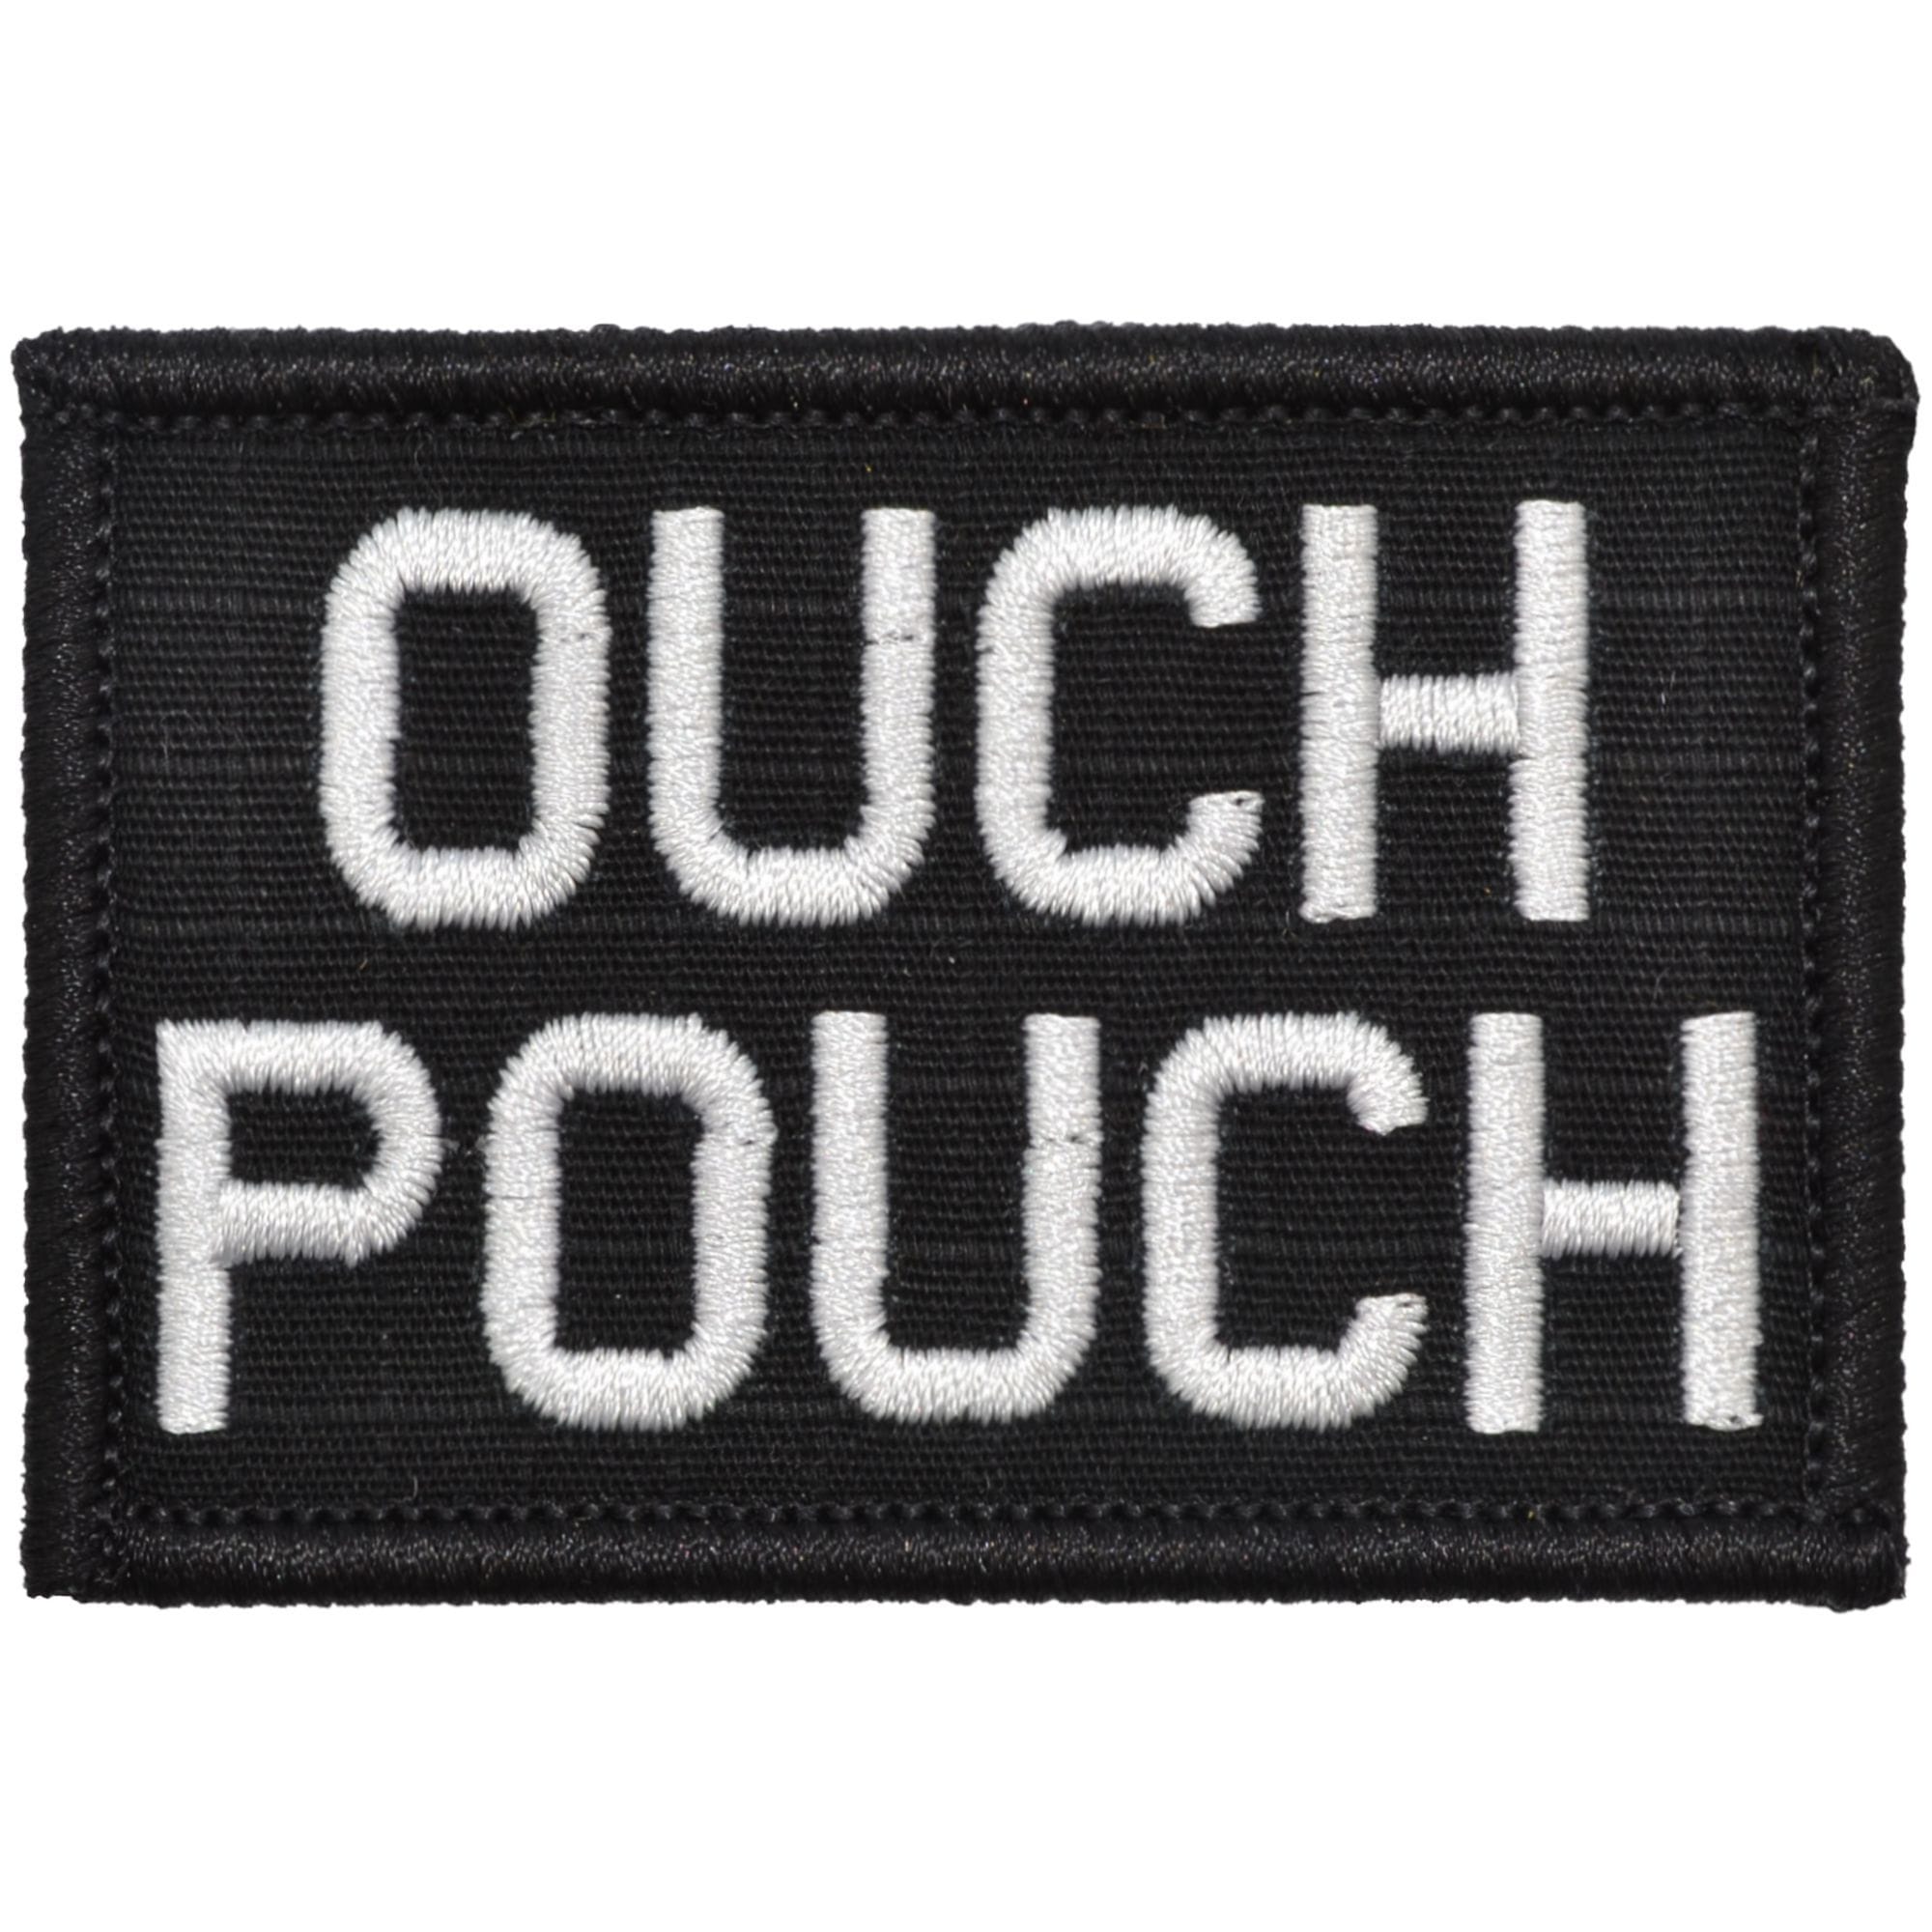 Tactical Gear Junkie Patches Black Ouch Pouch - 2x3 Patch